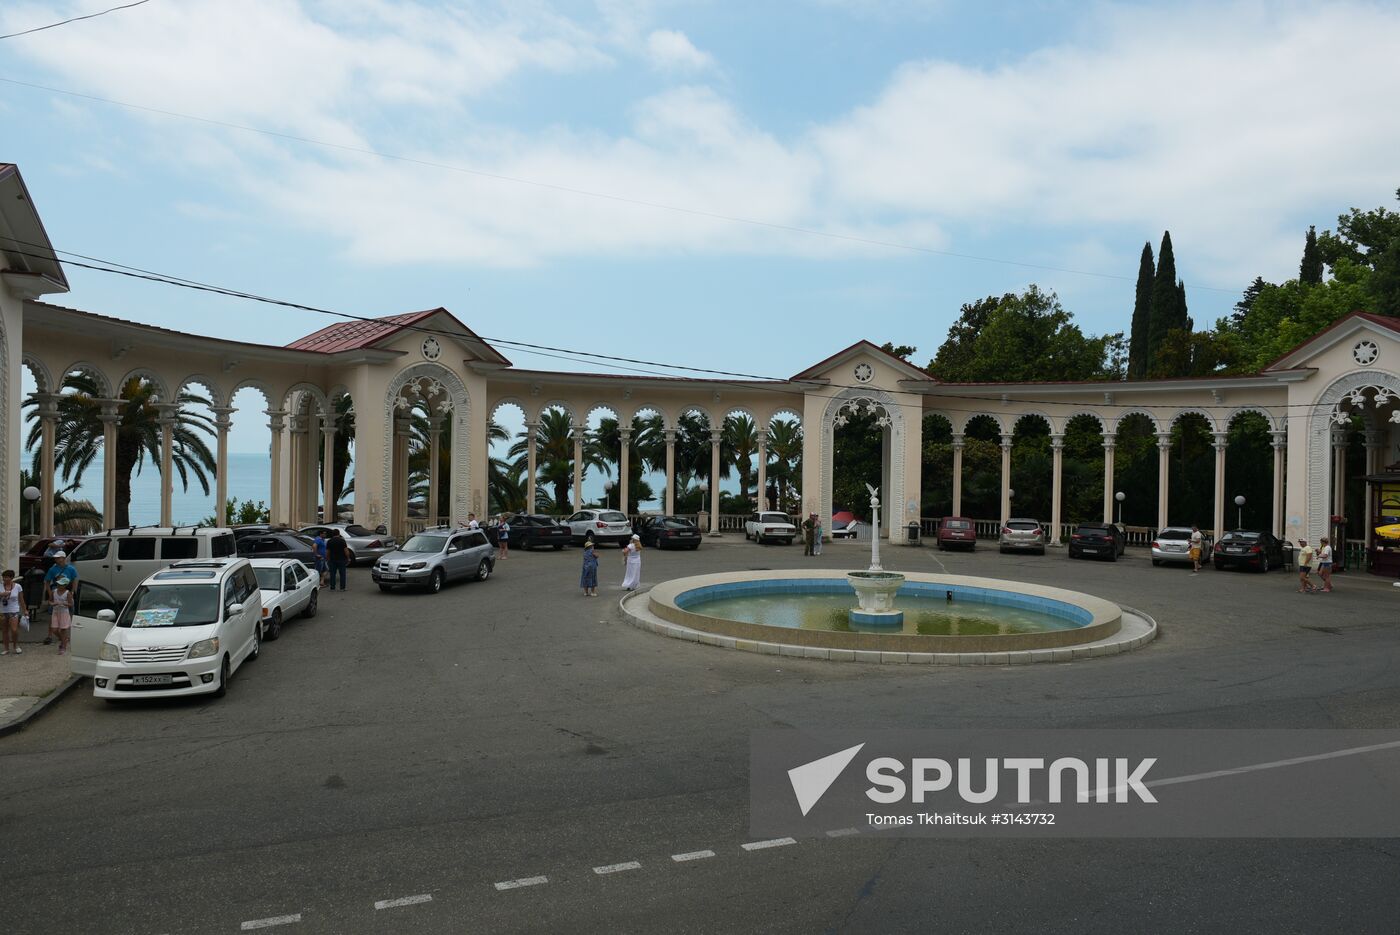 Holiday-makers in Abkhazia